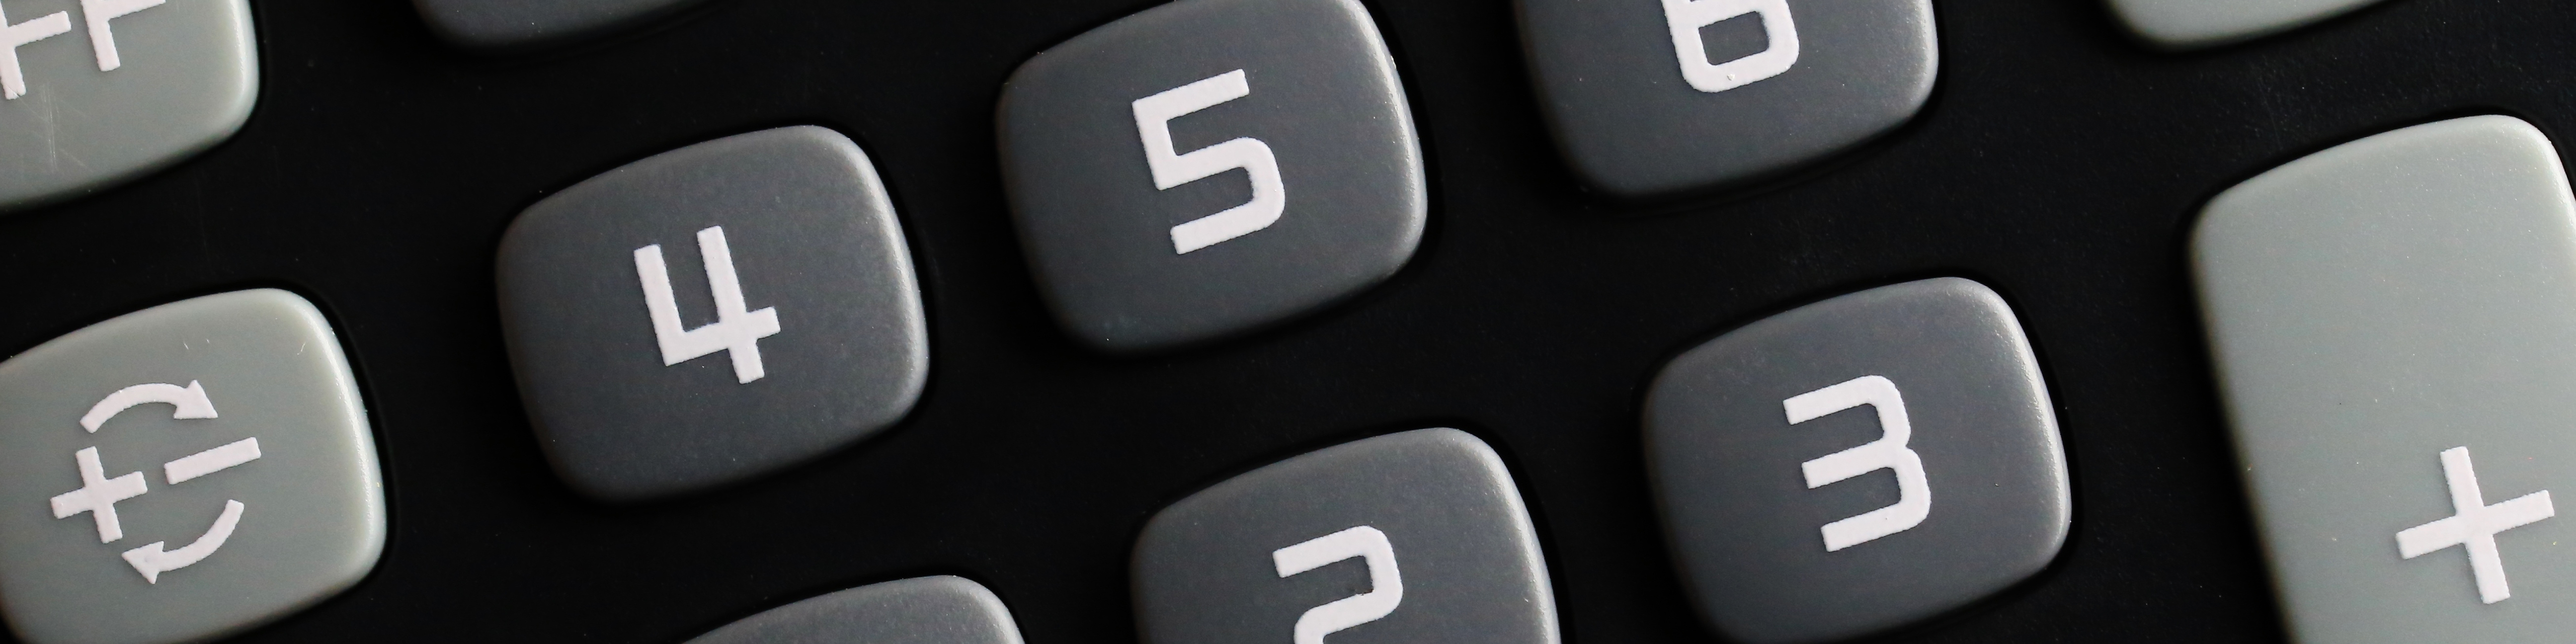 Close-up of gray and white calculator buttons on a black calculator